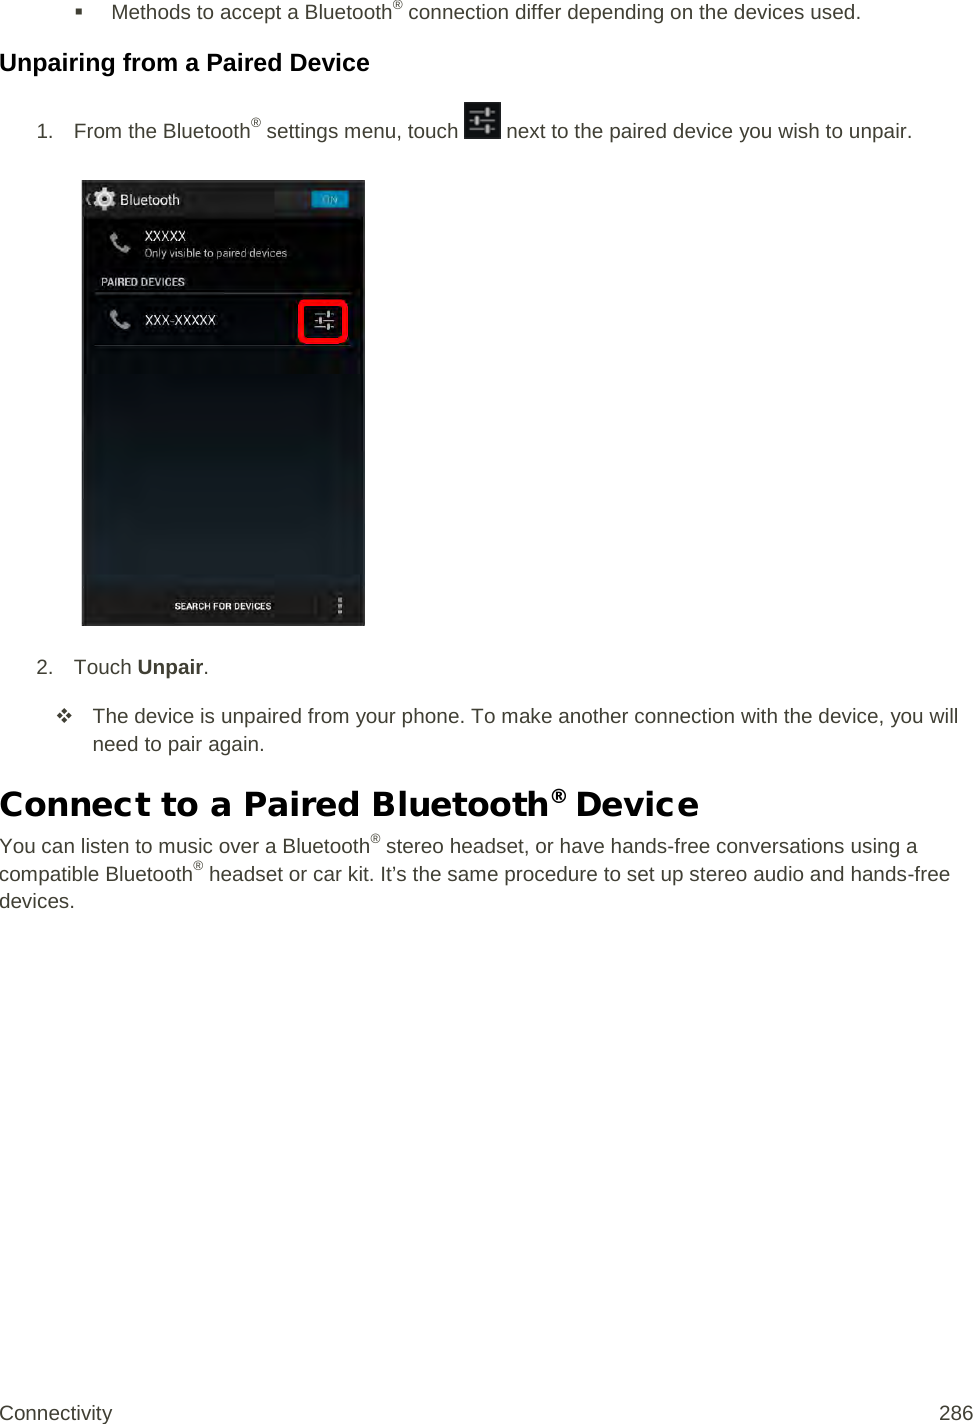  Methods to accept a Bluetooth® connection differ depending on the devices used. Unpairing from a Paired Device 1. From the Bluetooth® settings menu, touch   next to the paired device you wish to unpair.   2. Touch Unpair.  The device is unpaired from your phone. To make another connection with the device, you will need to pair again. Connect to a Paired Bluetooth® Device You can listen to music over a Bluetooth® stereo headset, or have hands-free conversations using a compatible Bluetooth® headset or car kit. It’s the same procedure to set up stereo audio and hands-free devices. Connectivity 286   